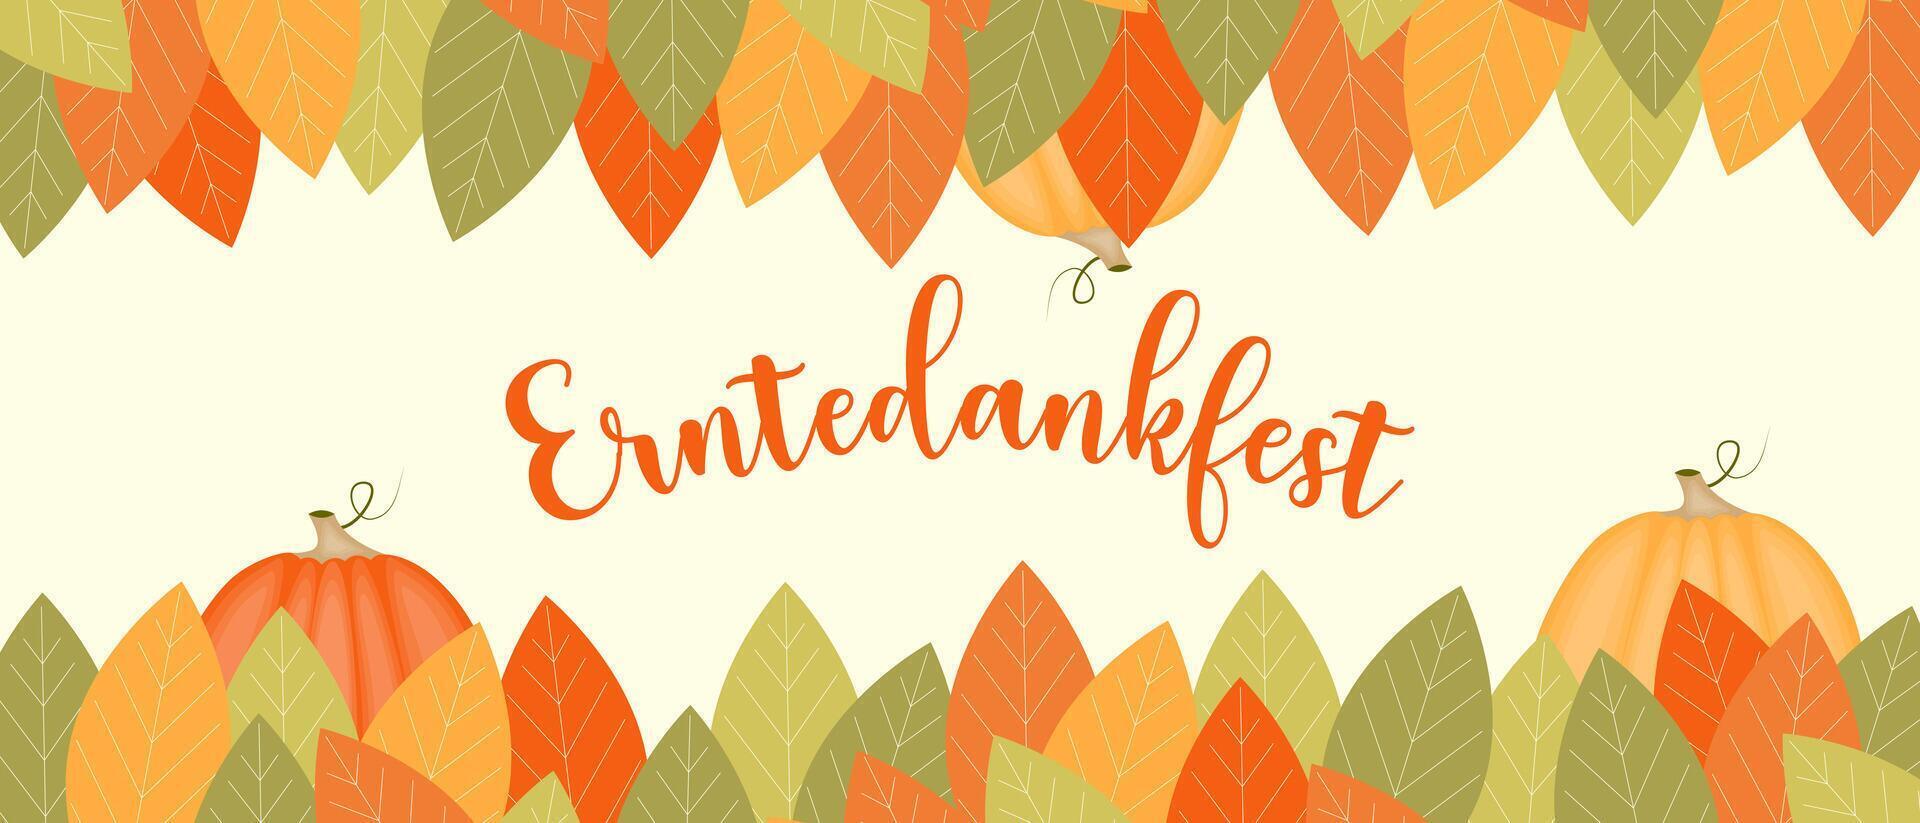 Card with german text Erntedankfest, translation of Thanksgiving with pumpkins and leaf. vector